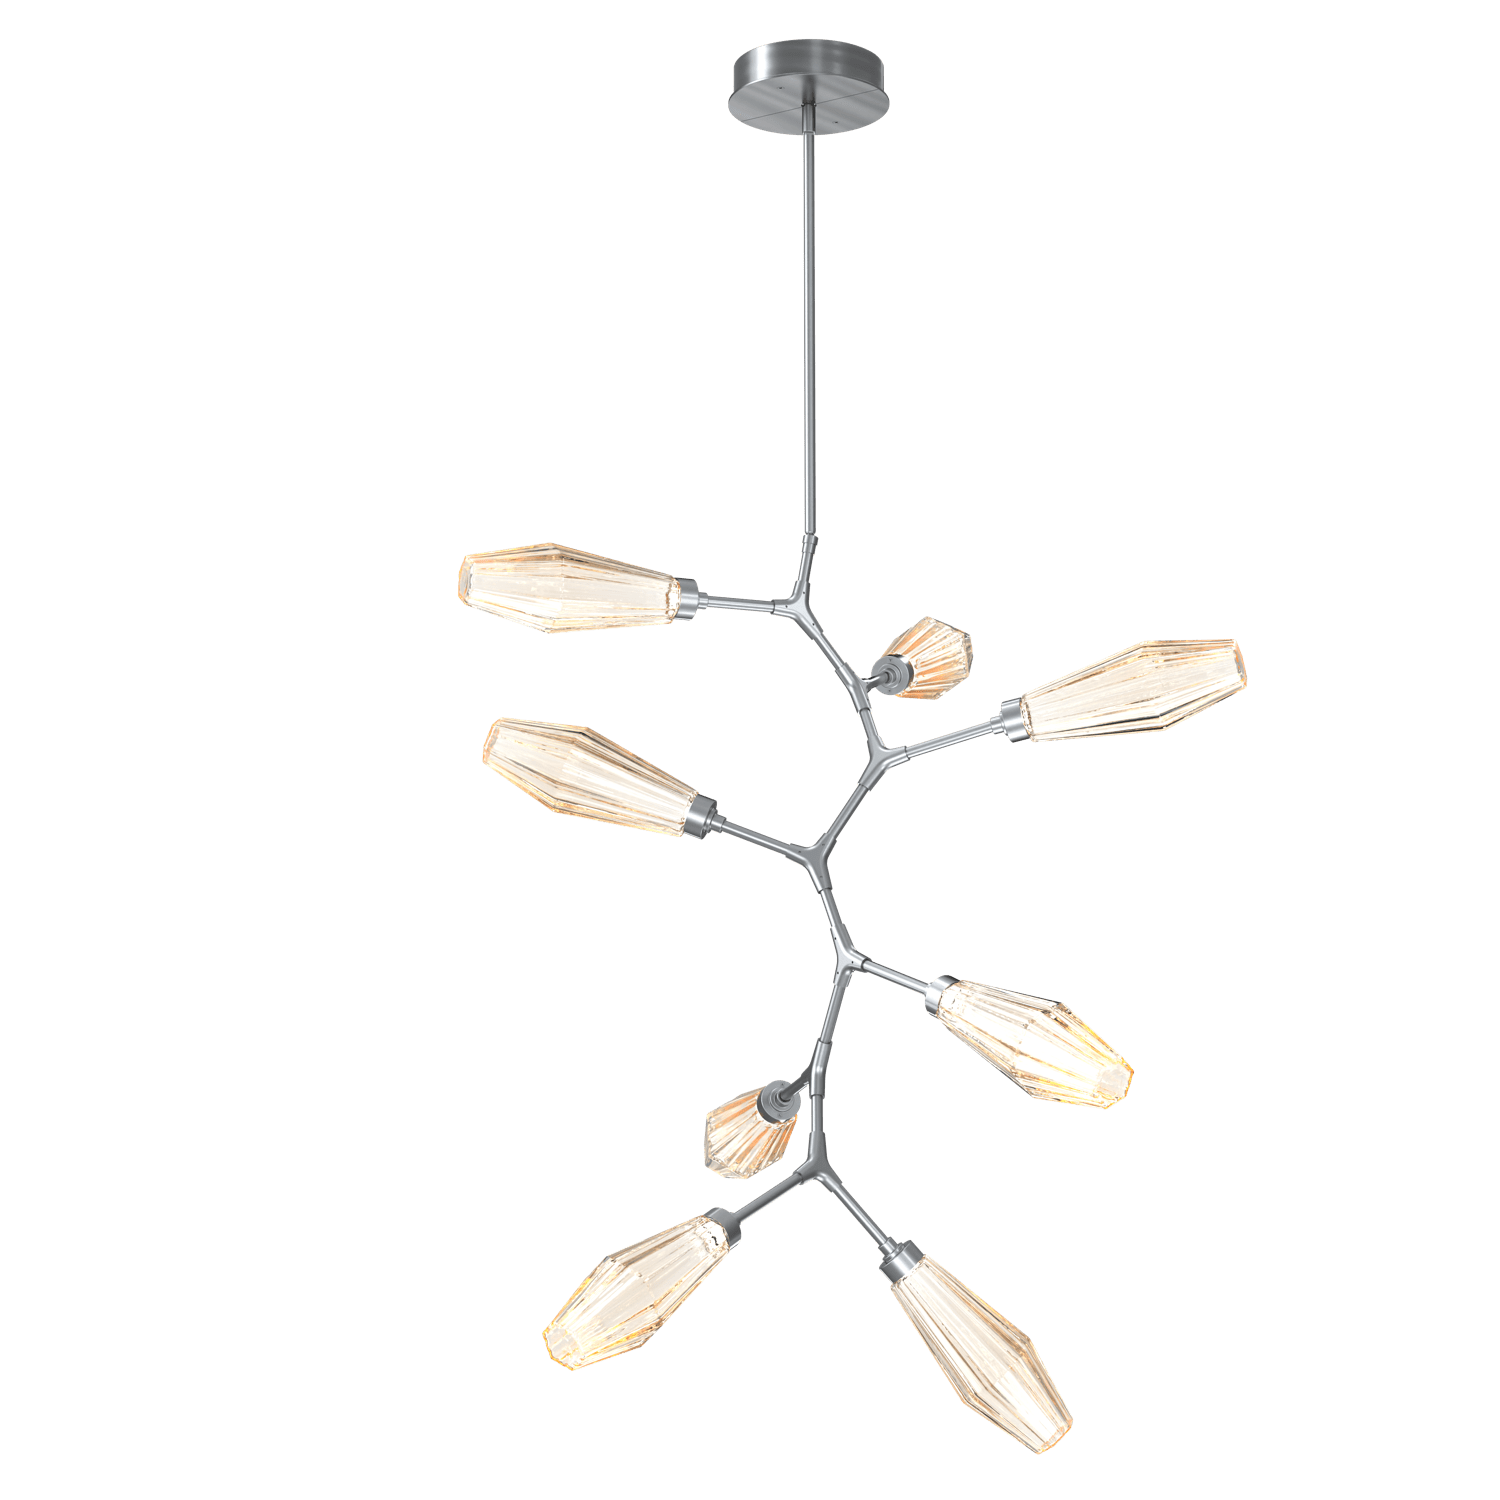 CHB0049-VB-GM-RA-Hammerton-Studio-Aalto-8-light-modern-vine-chandelier-with-gunmetal-finish-and-optic-ribbed-amber-glass-shades-and-LED-lamping